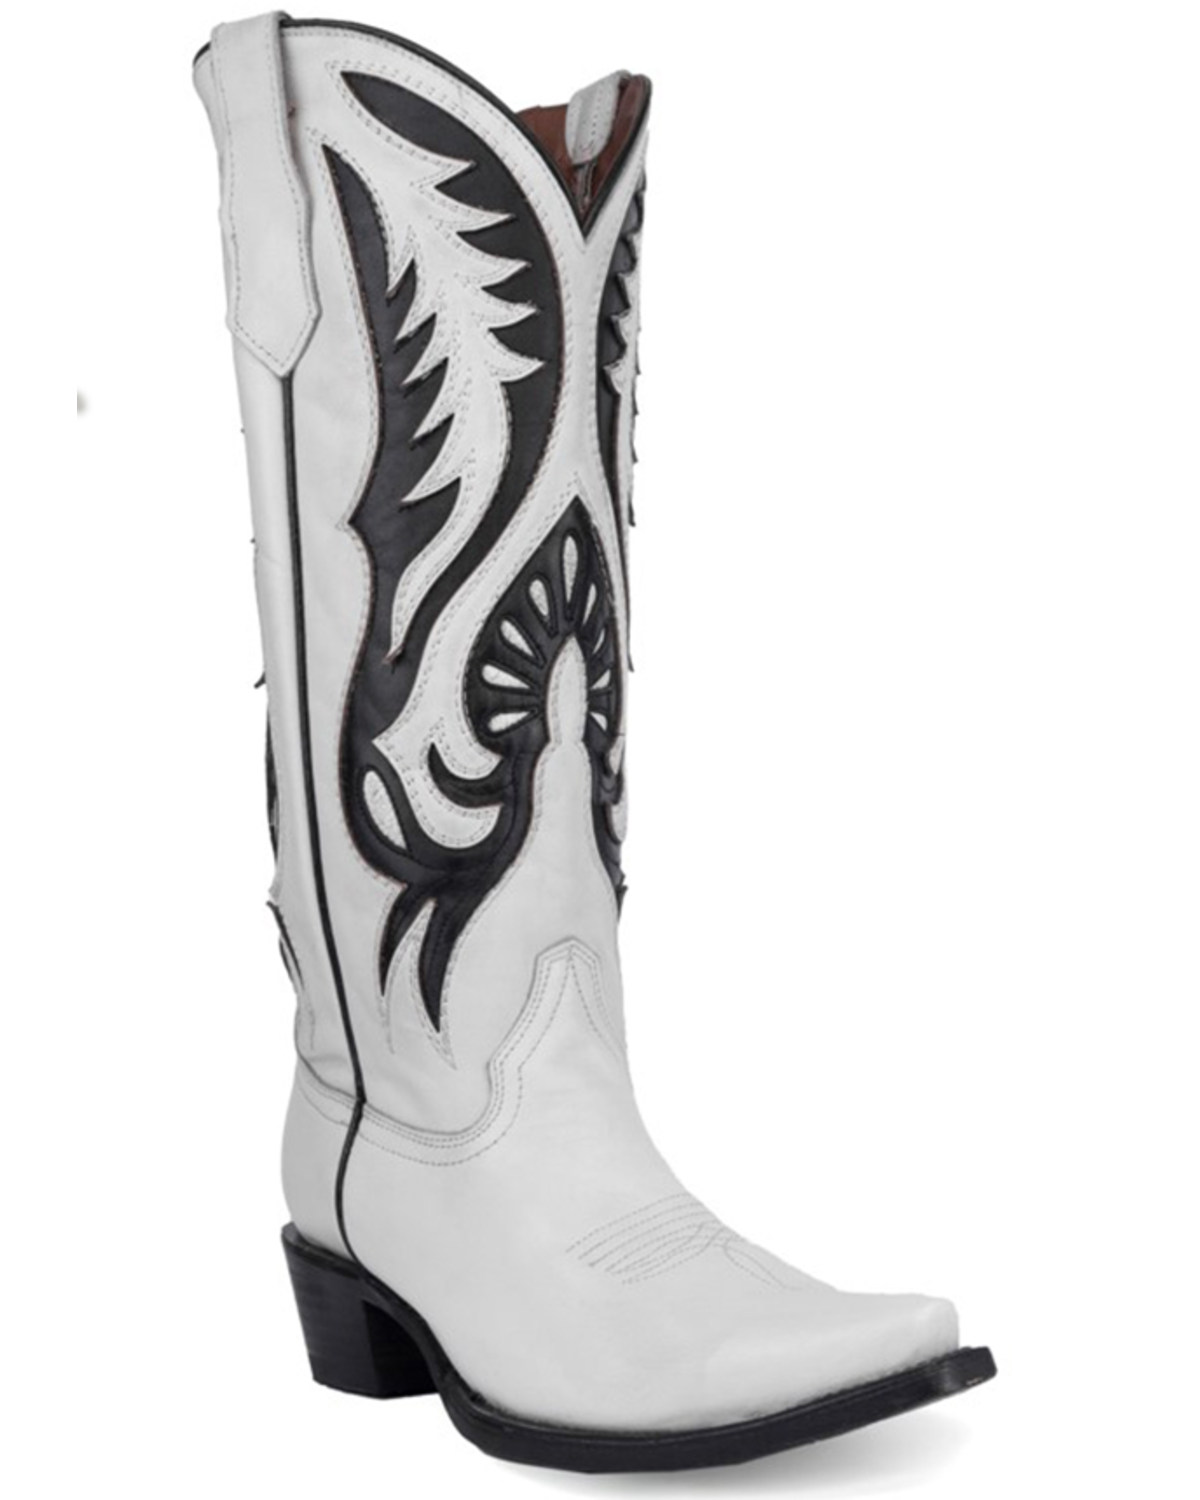 Corral Women's Inlay Western Boots - Snip Toe